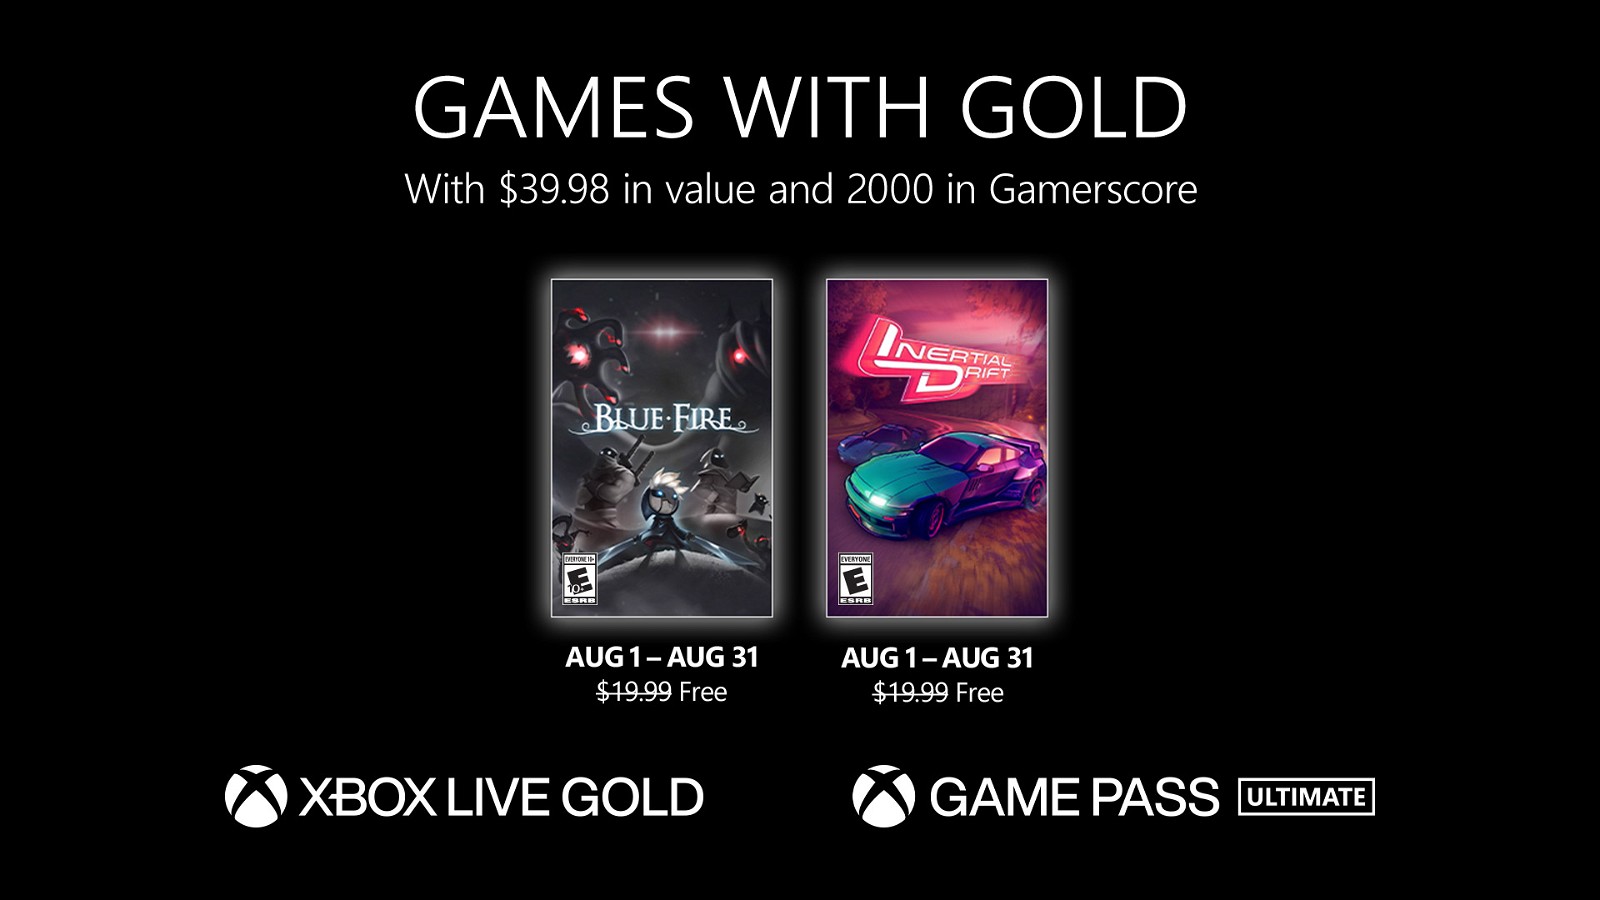 The final two Games with Gold titles will be Blue Fire and Inertial Drift. 